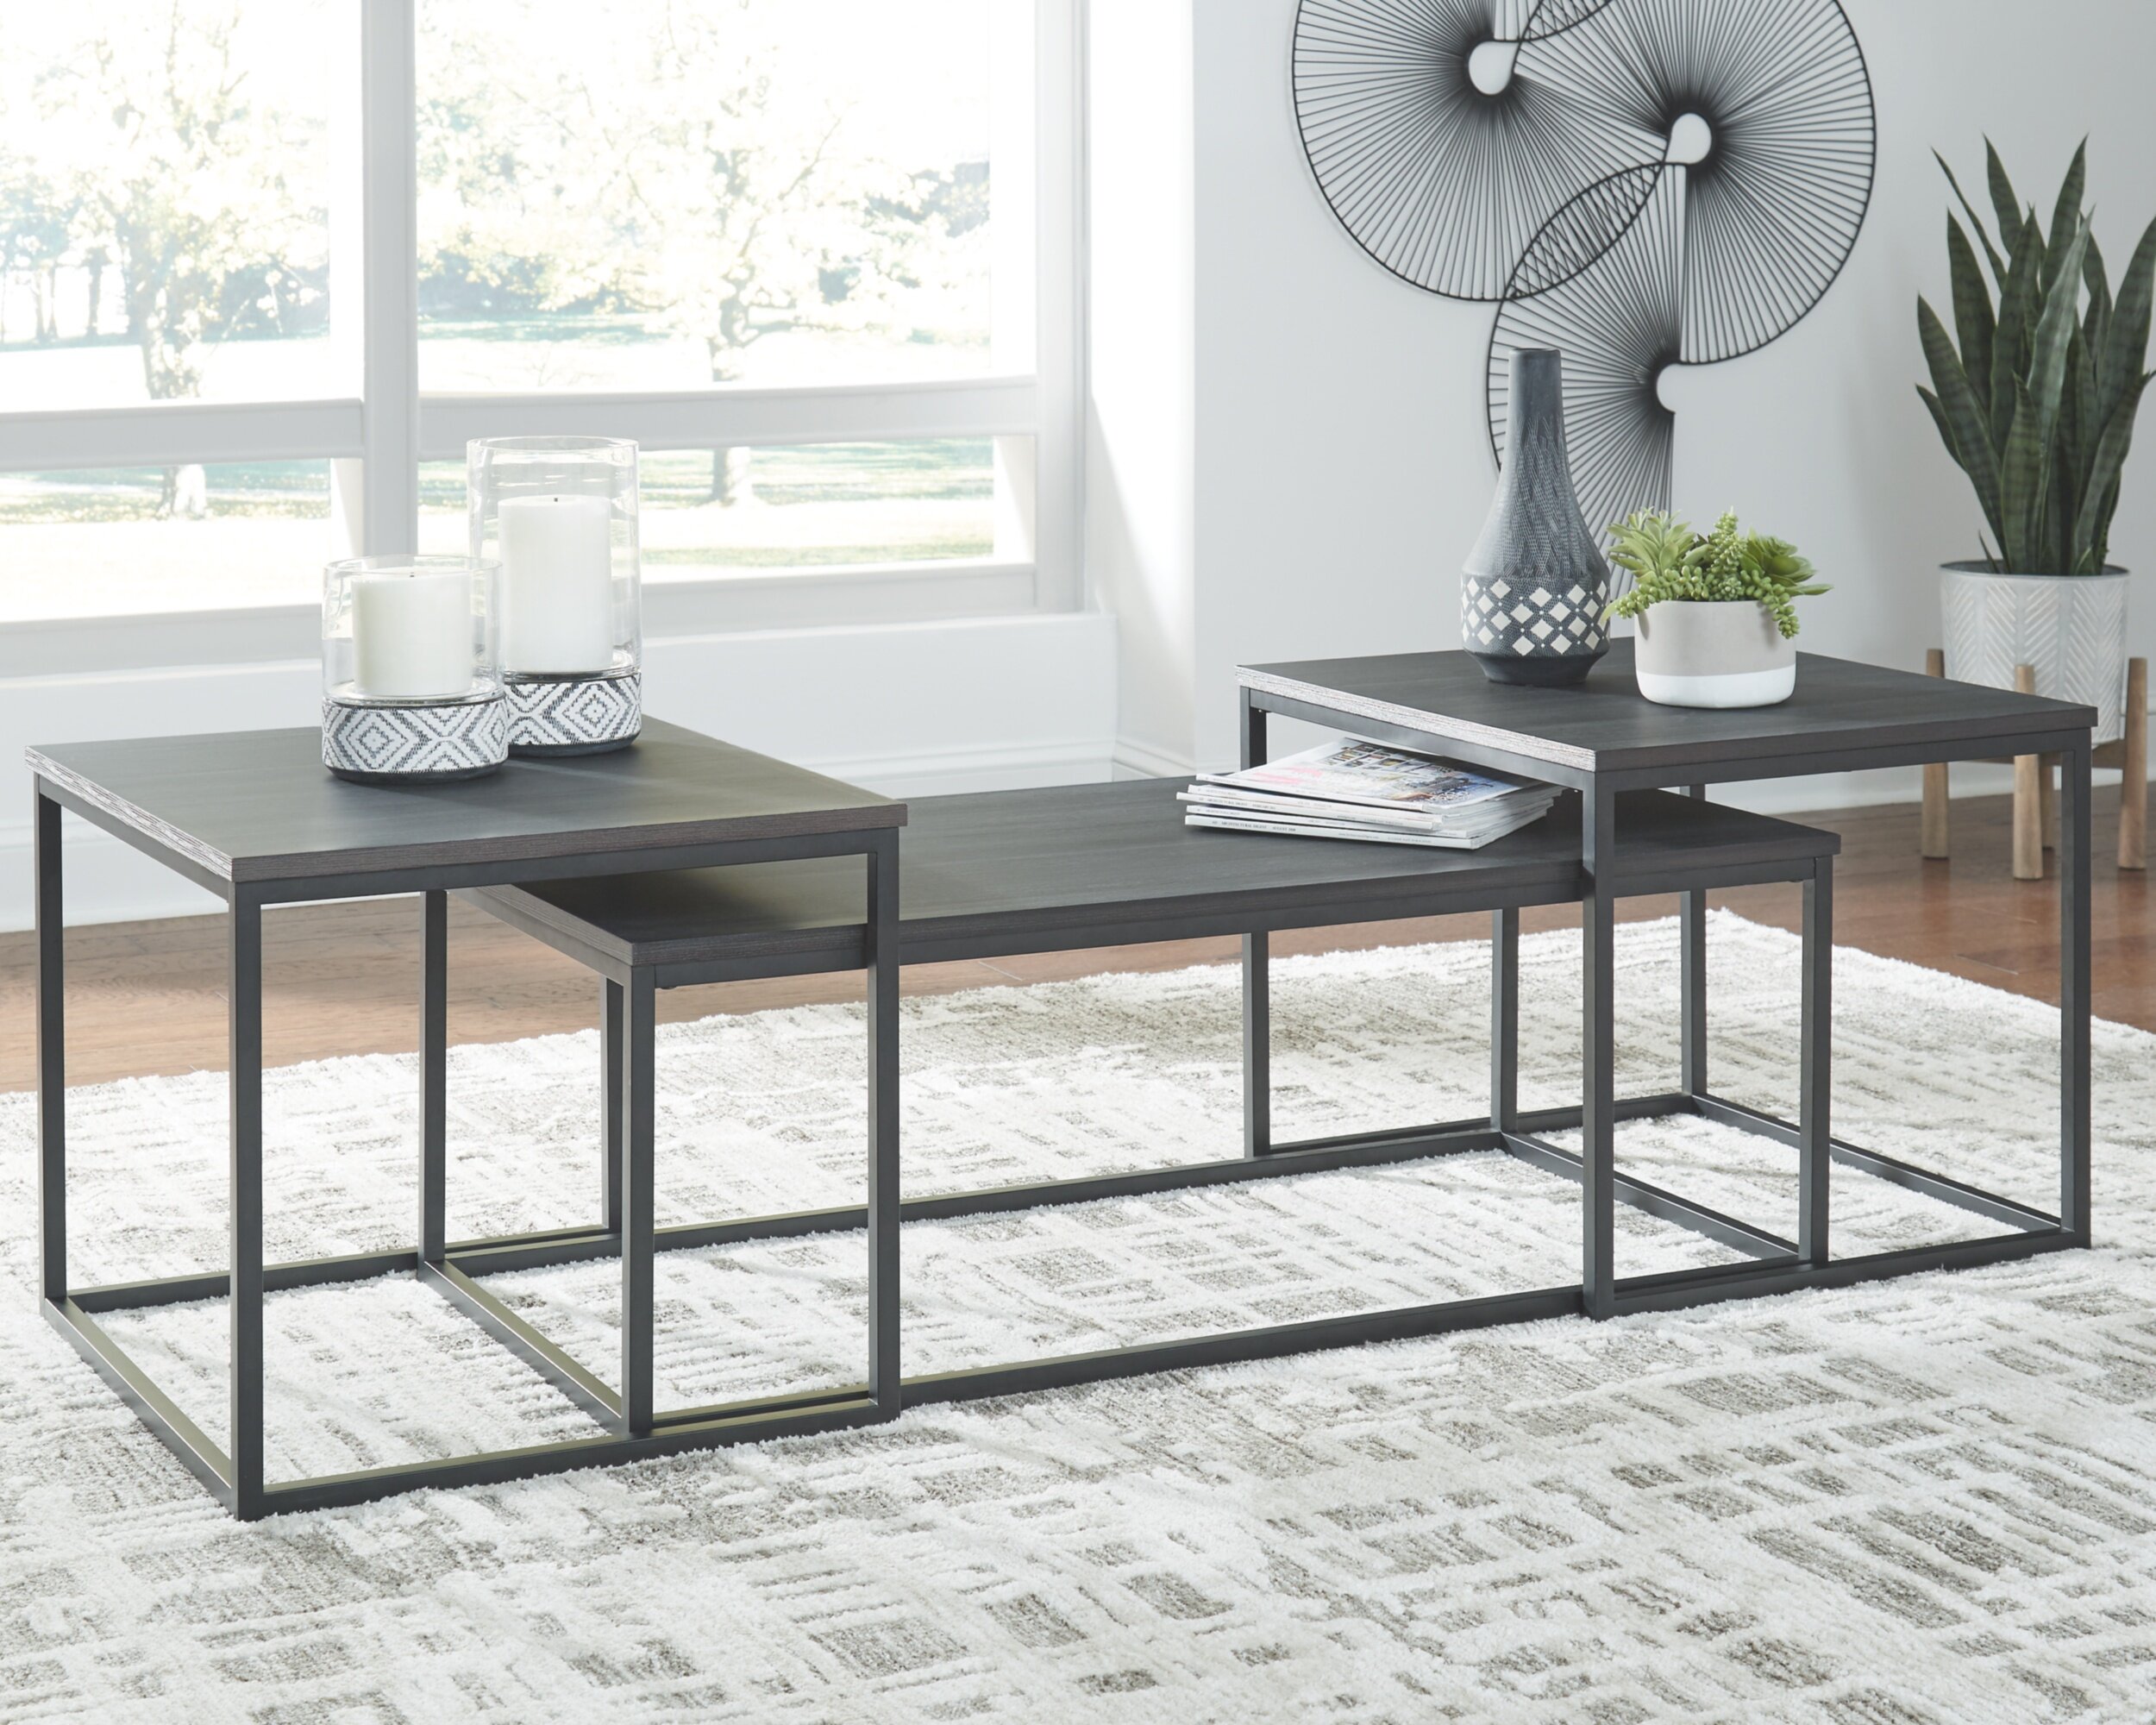 Jet Black 2 Round Tea Table Coffee Table Desk Sets Jerry /& Maggie Twin Sets Multi Function Wood /& Steel Living Room Home Decor Polished Surface Overlapping Ending Tables Cocktail Table